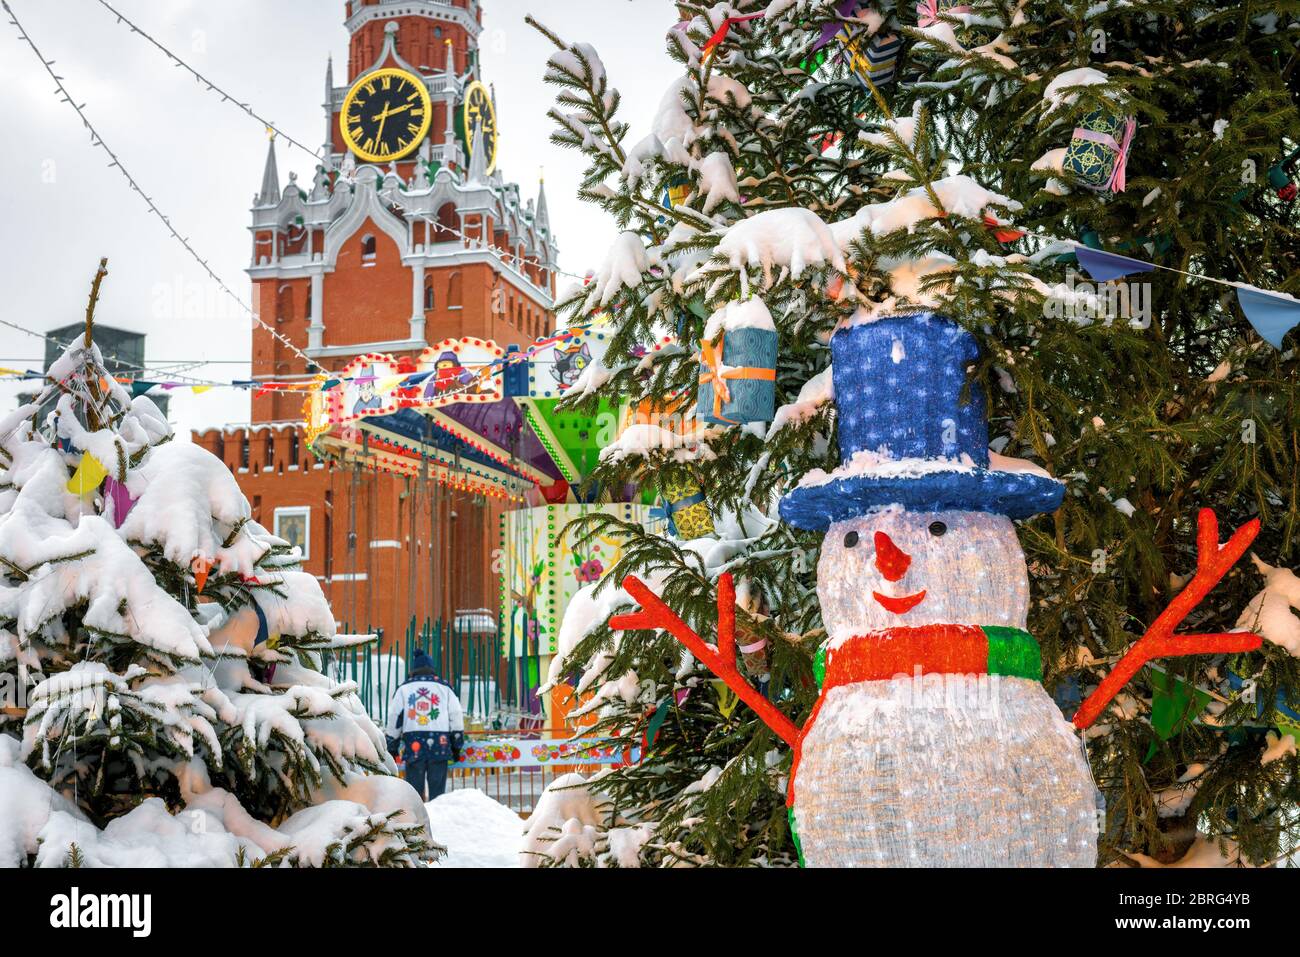 Moscow, Russia - February 5, 2018: Christmas decorations near Moscow Kremlin in winter. Central Moscow during snowfall. Snowman by the fir on the fest Stock Photo